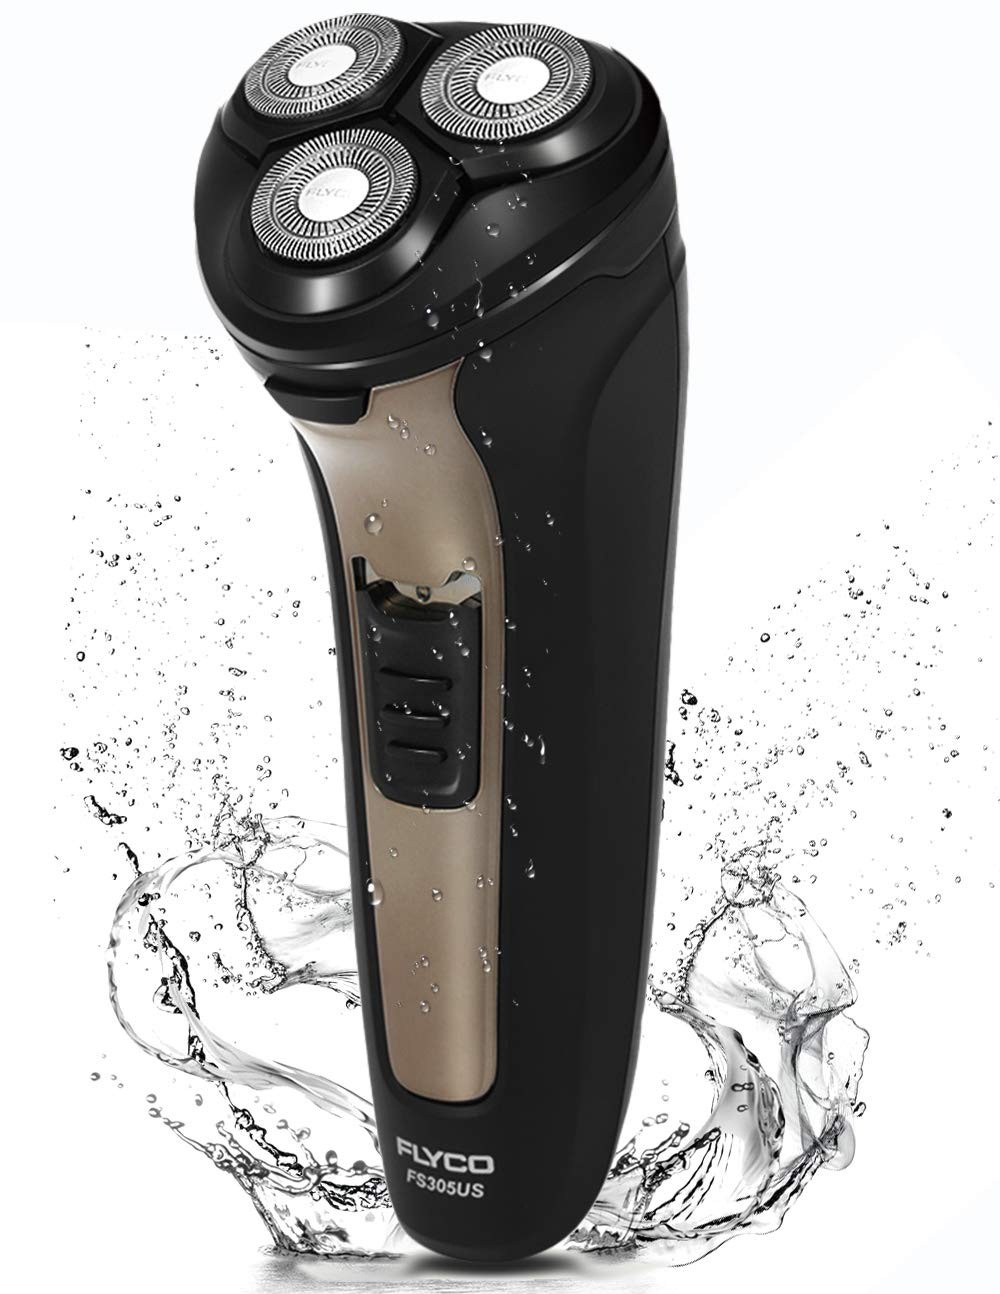 Electric Razor for Men,FLYCO Electric Shavers 2 in 1 Mens Wet & Dry Electric Razors for Shaving